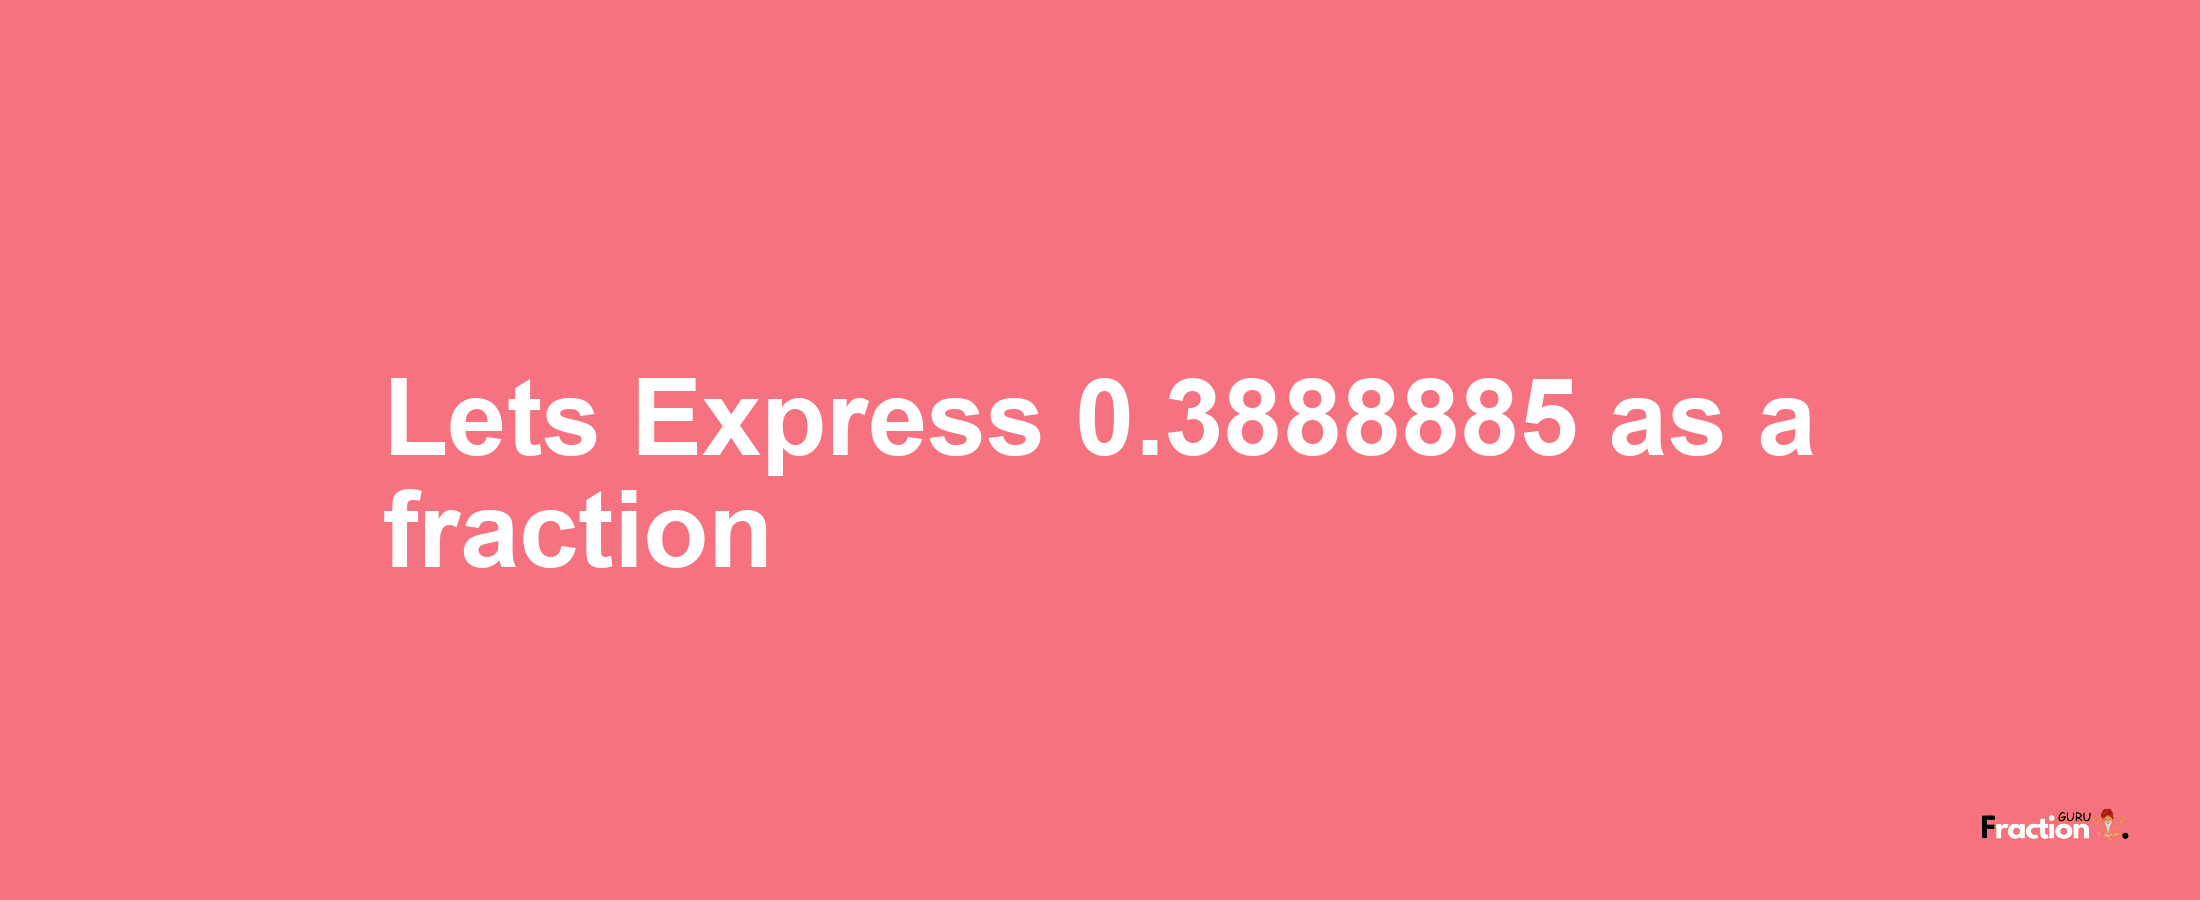 Lets Express 0.3888885 as afraction